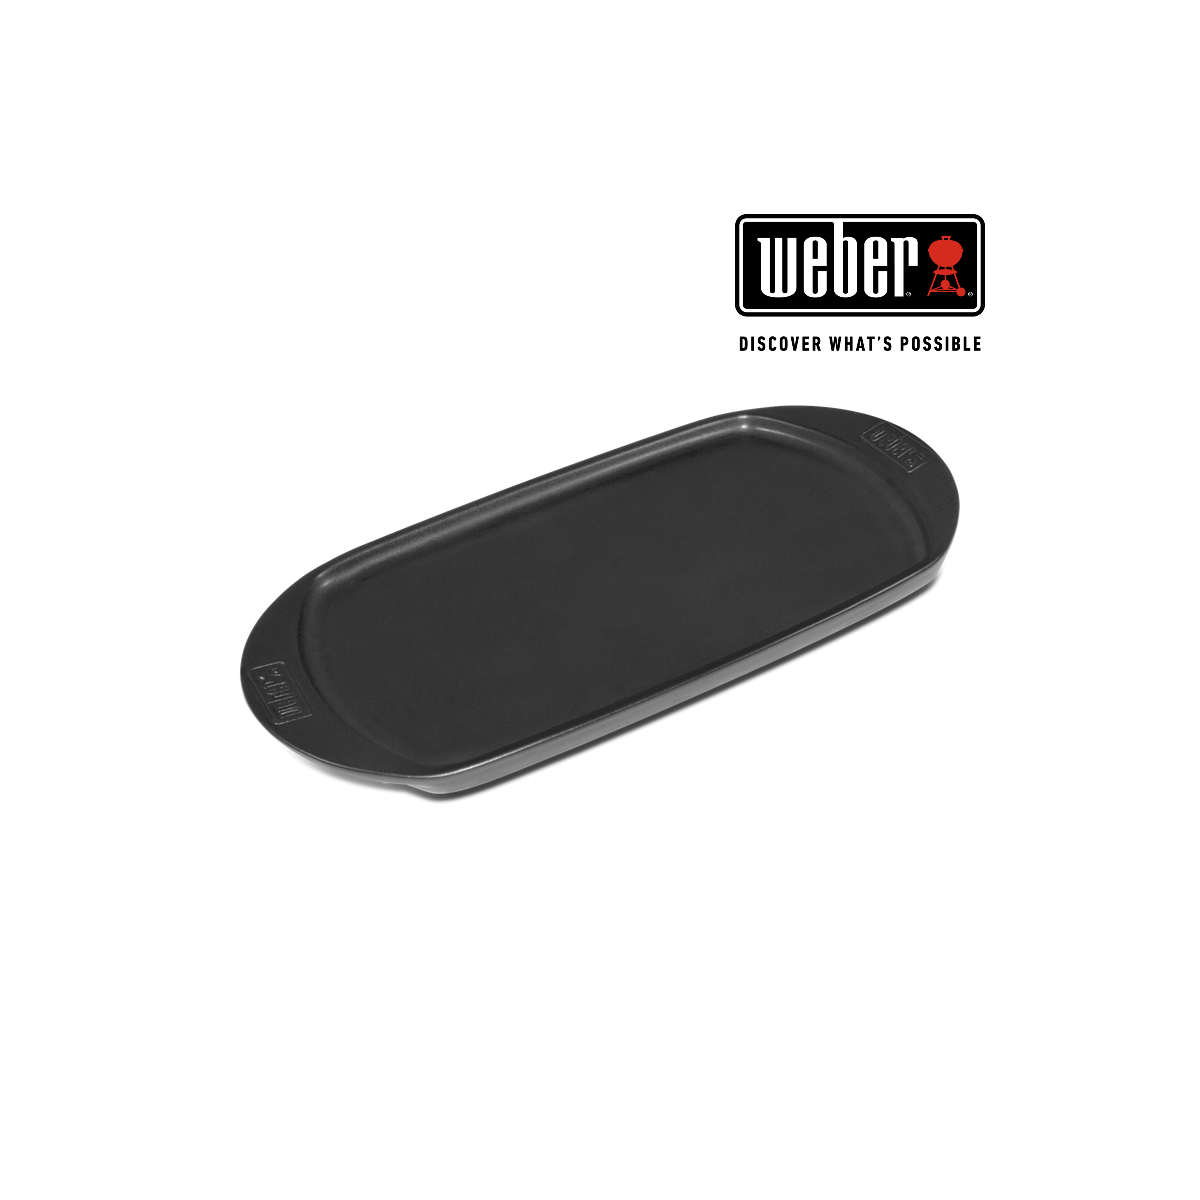 WEBER griddle - small 22x41cm 6465